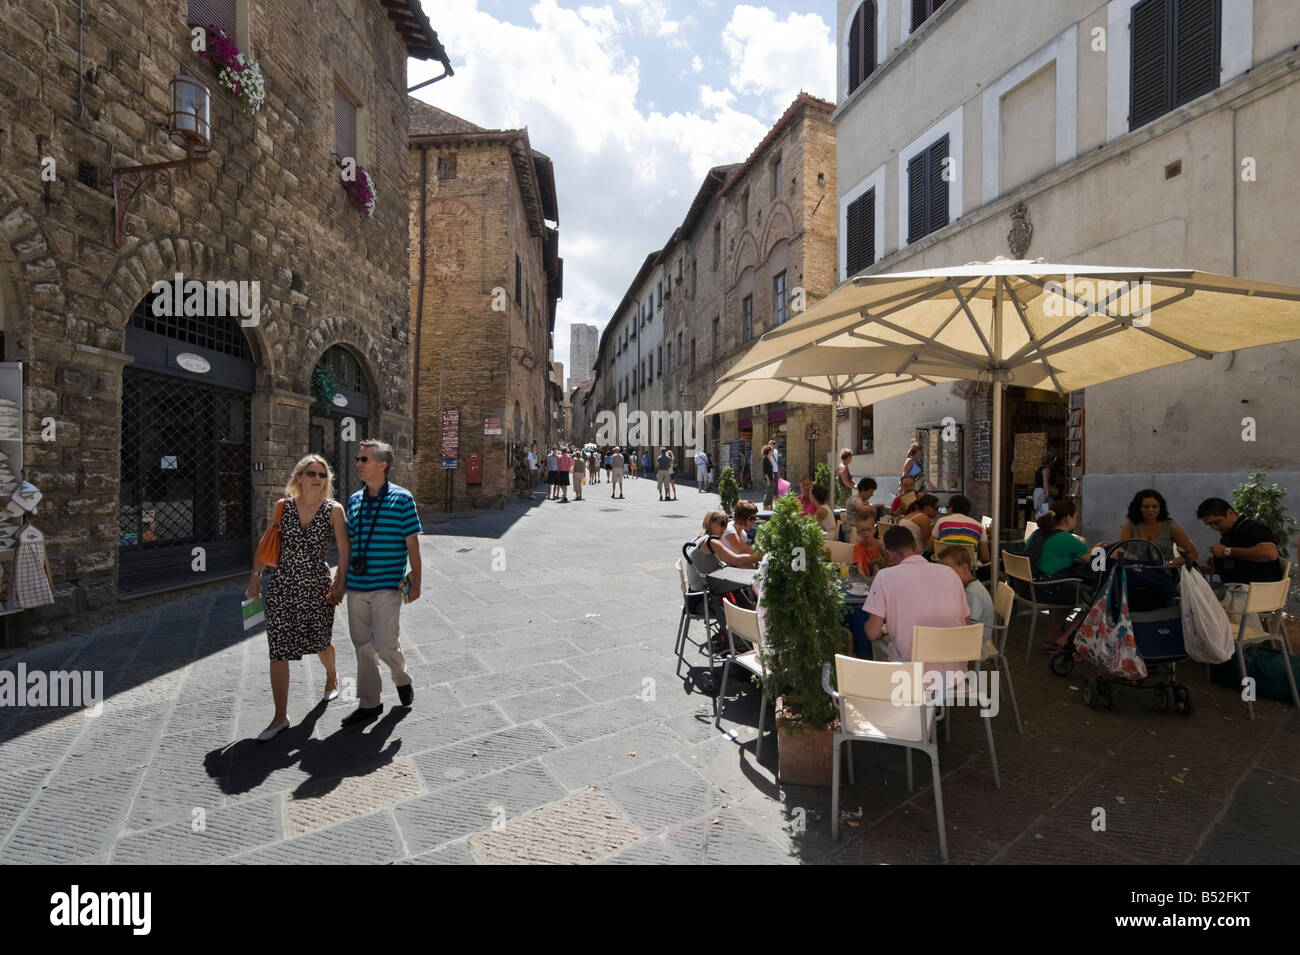 Cafe on Via San Matteo (one of the main in the old town), San Gimignano, Tuscany, Italy Stock Photo